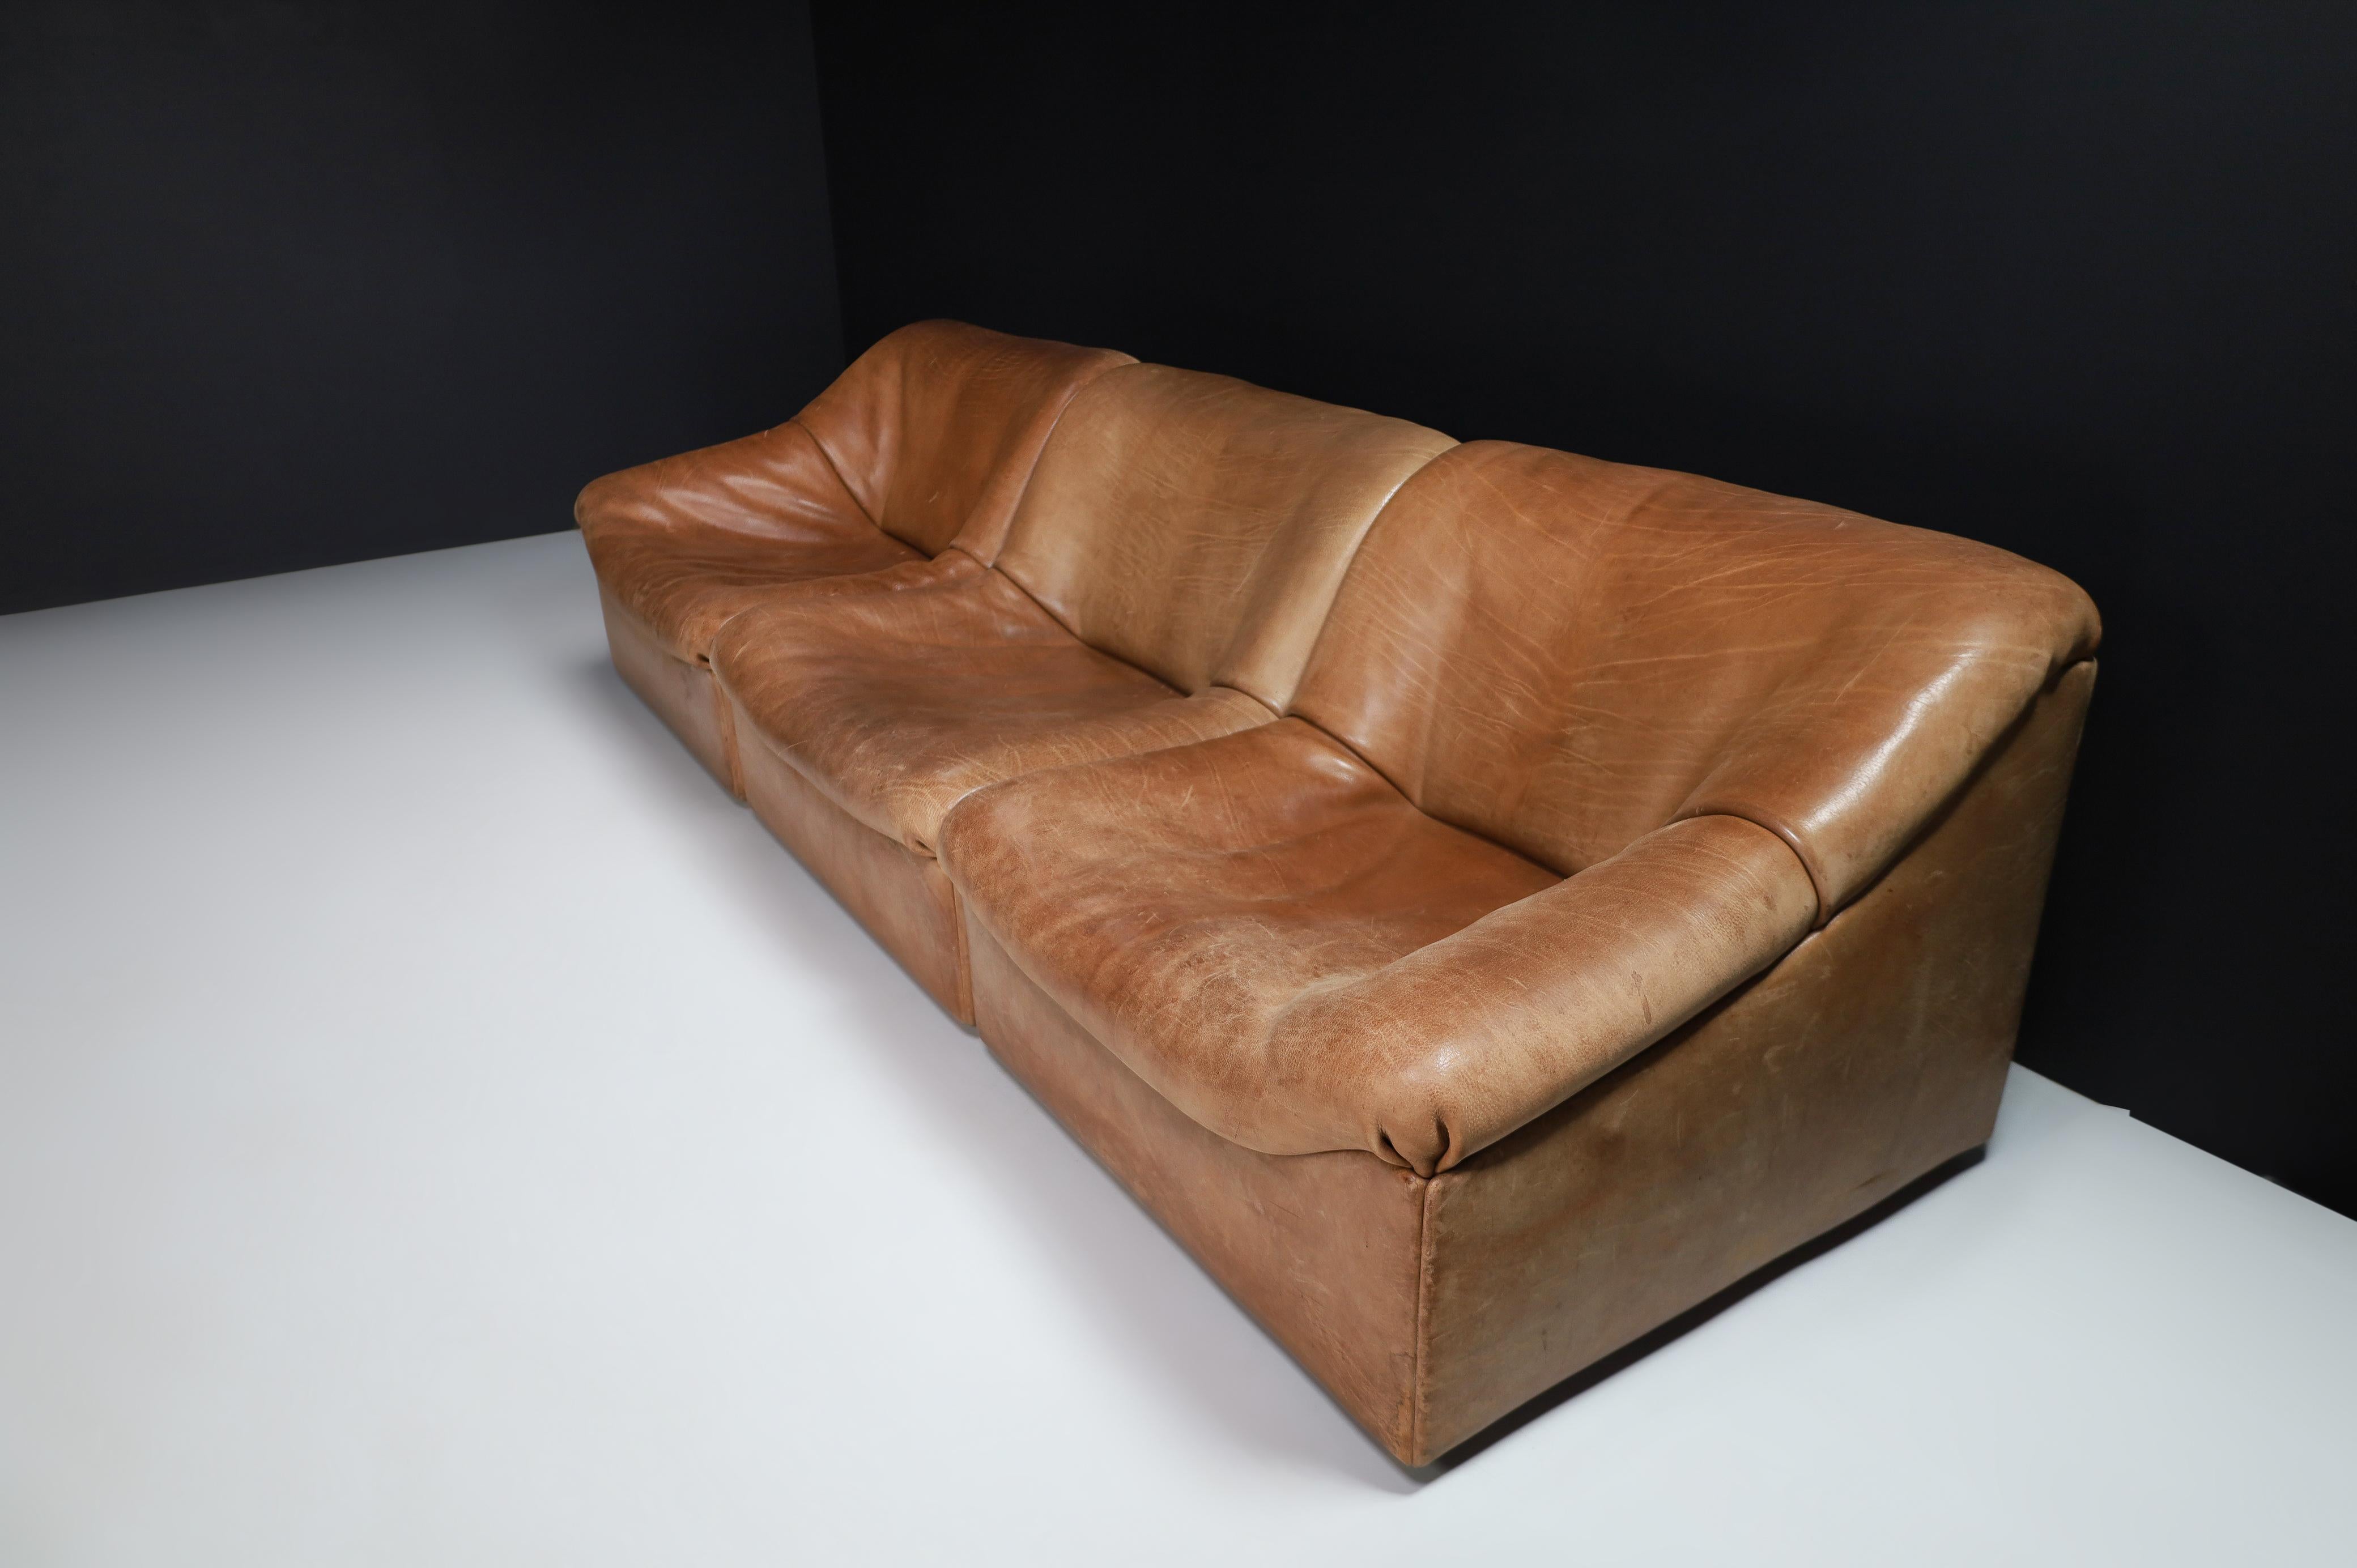 20th Century De Sede Ds46 Sectional Sofa-Livingroomset in Buffalo Leather, Switzerland 1970s For Sale